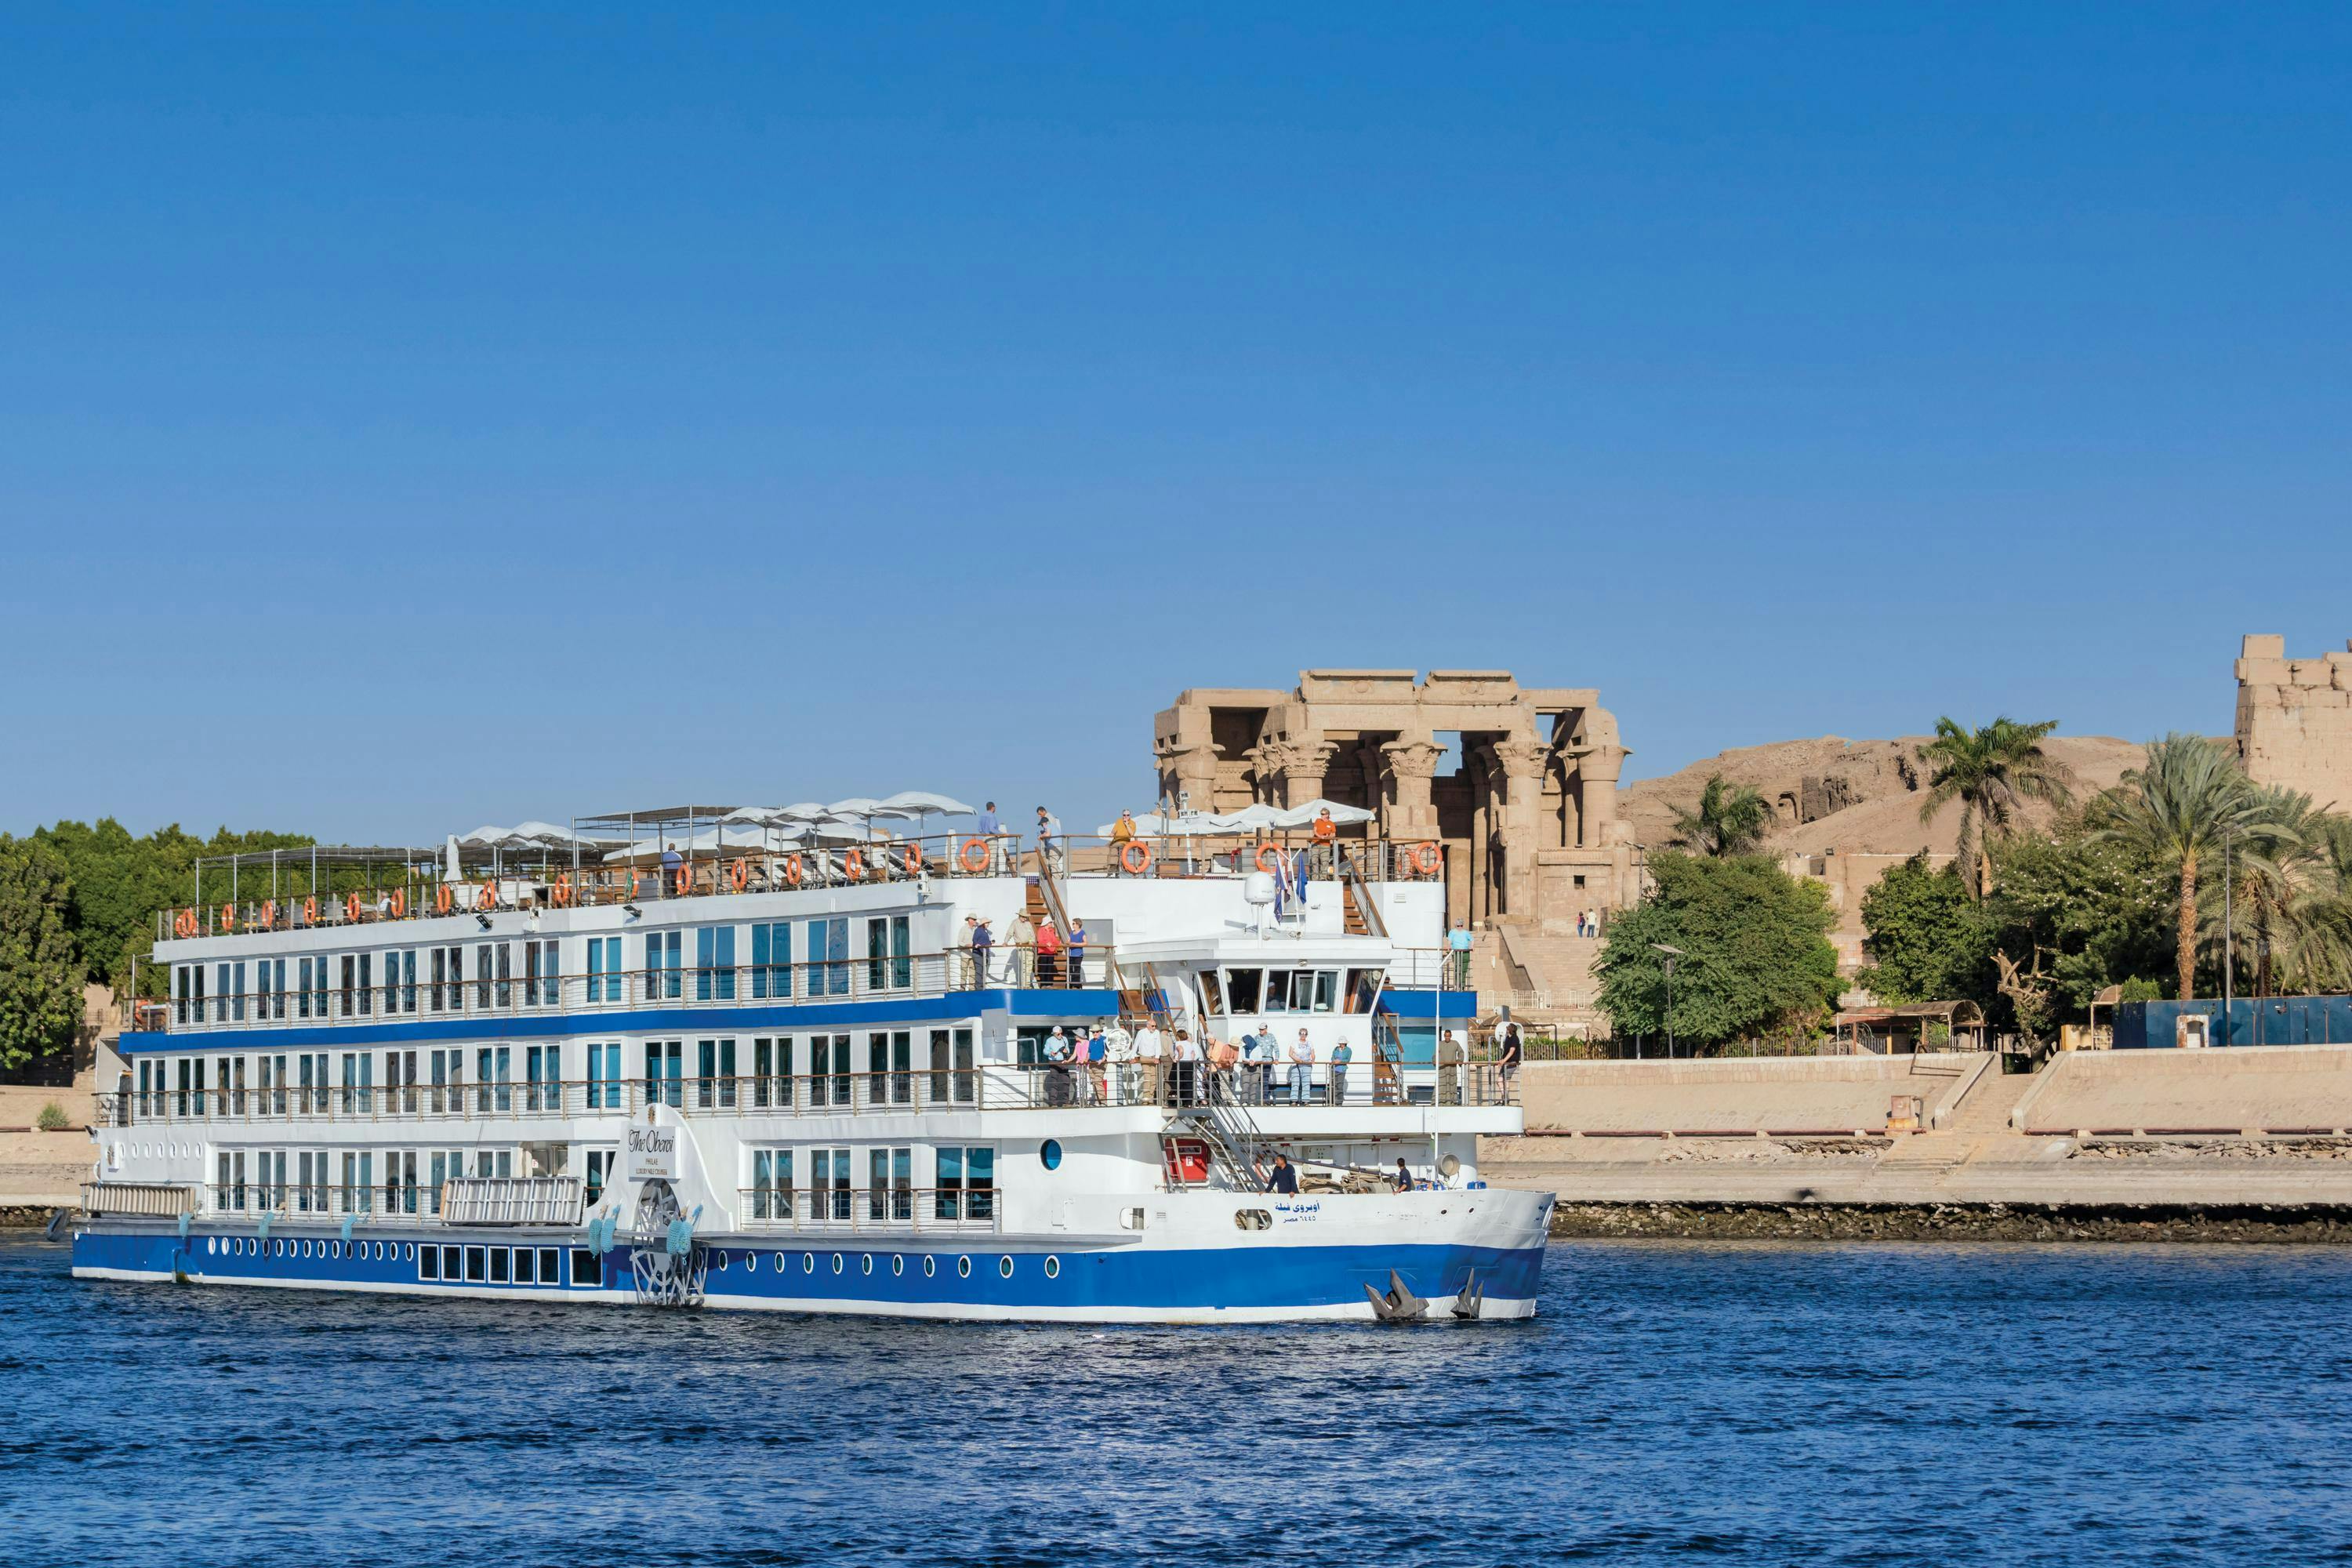 Guests on the ship Oberoi Philae departing from Kom Ombo to cruise further south on the Nile toward Aswan